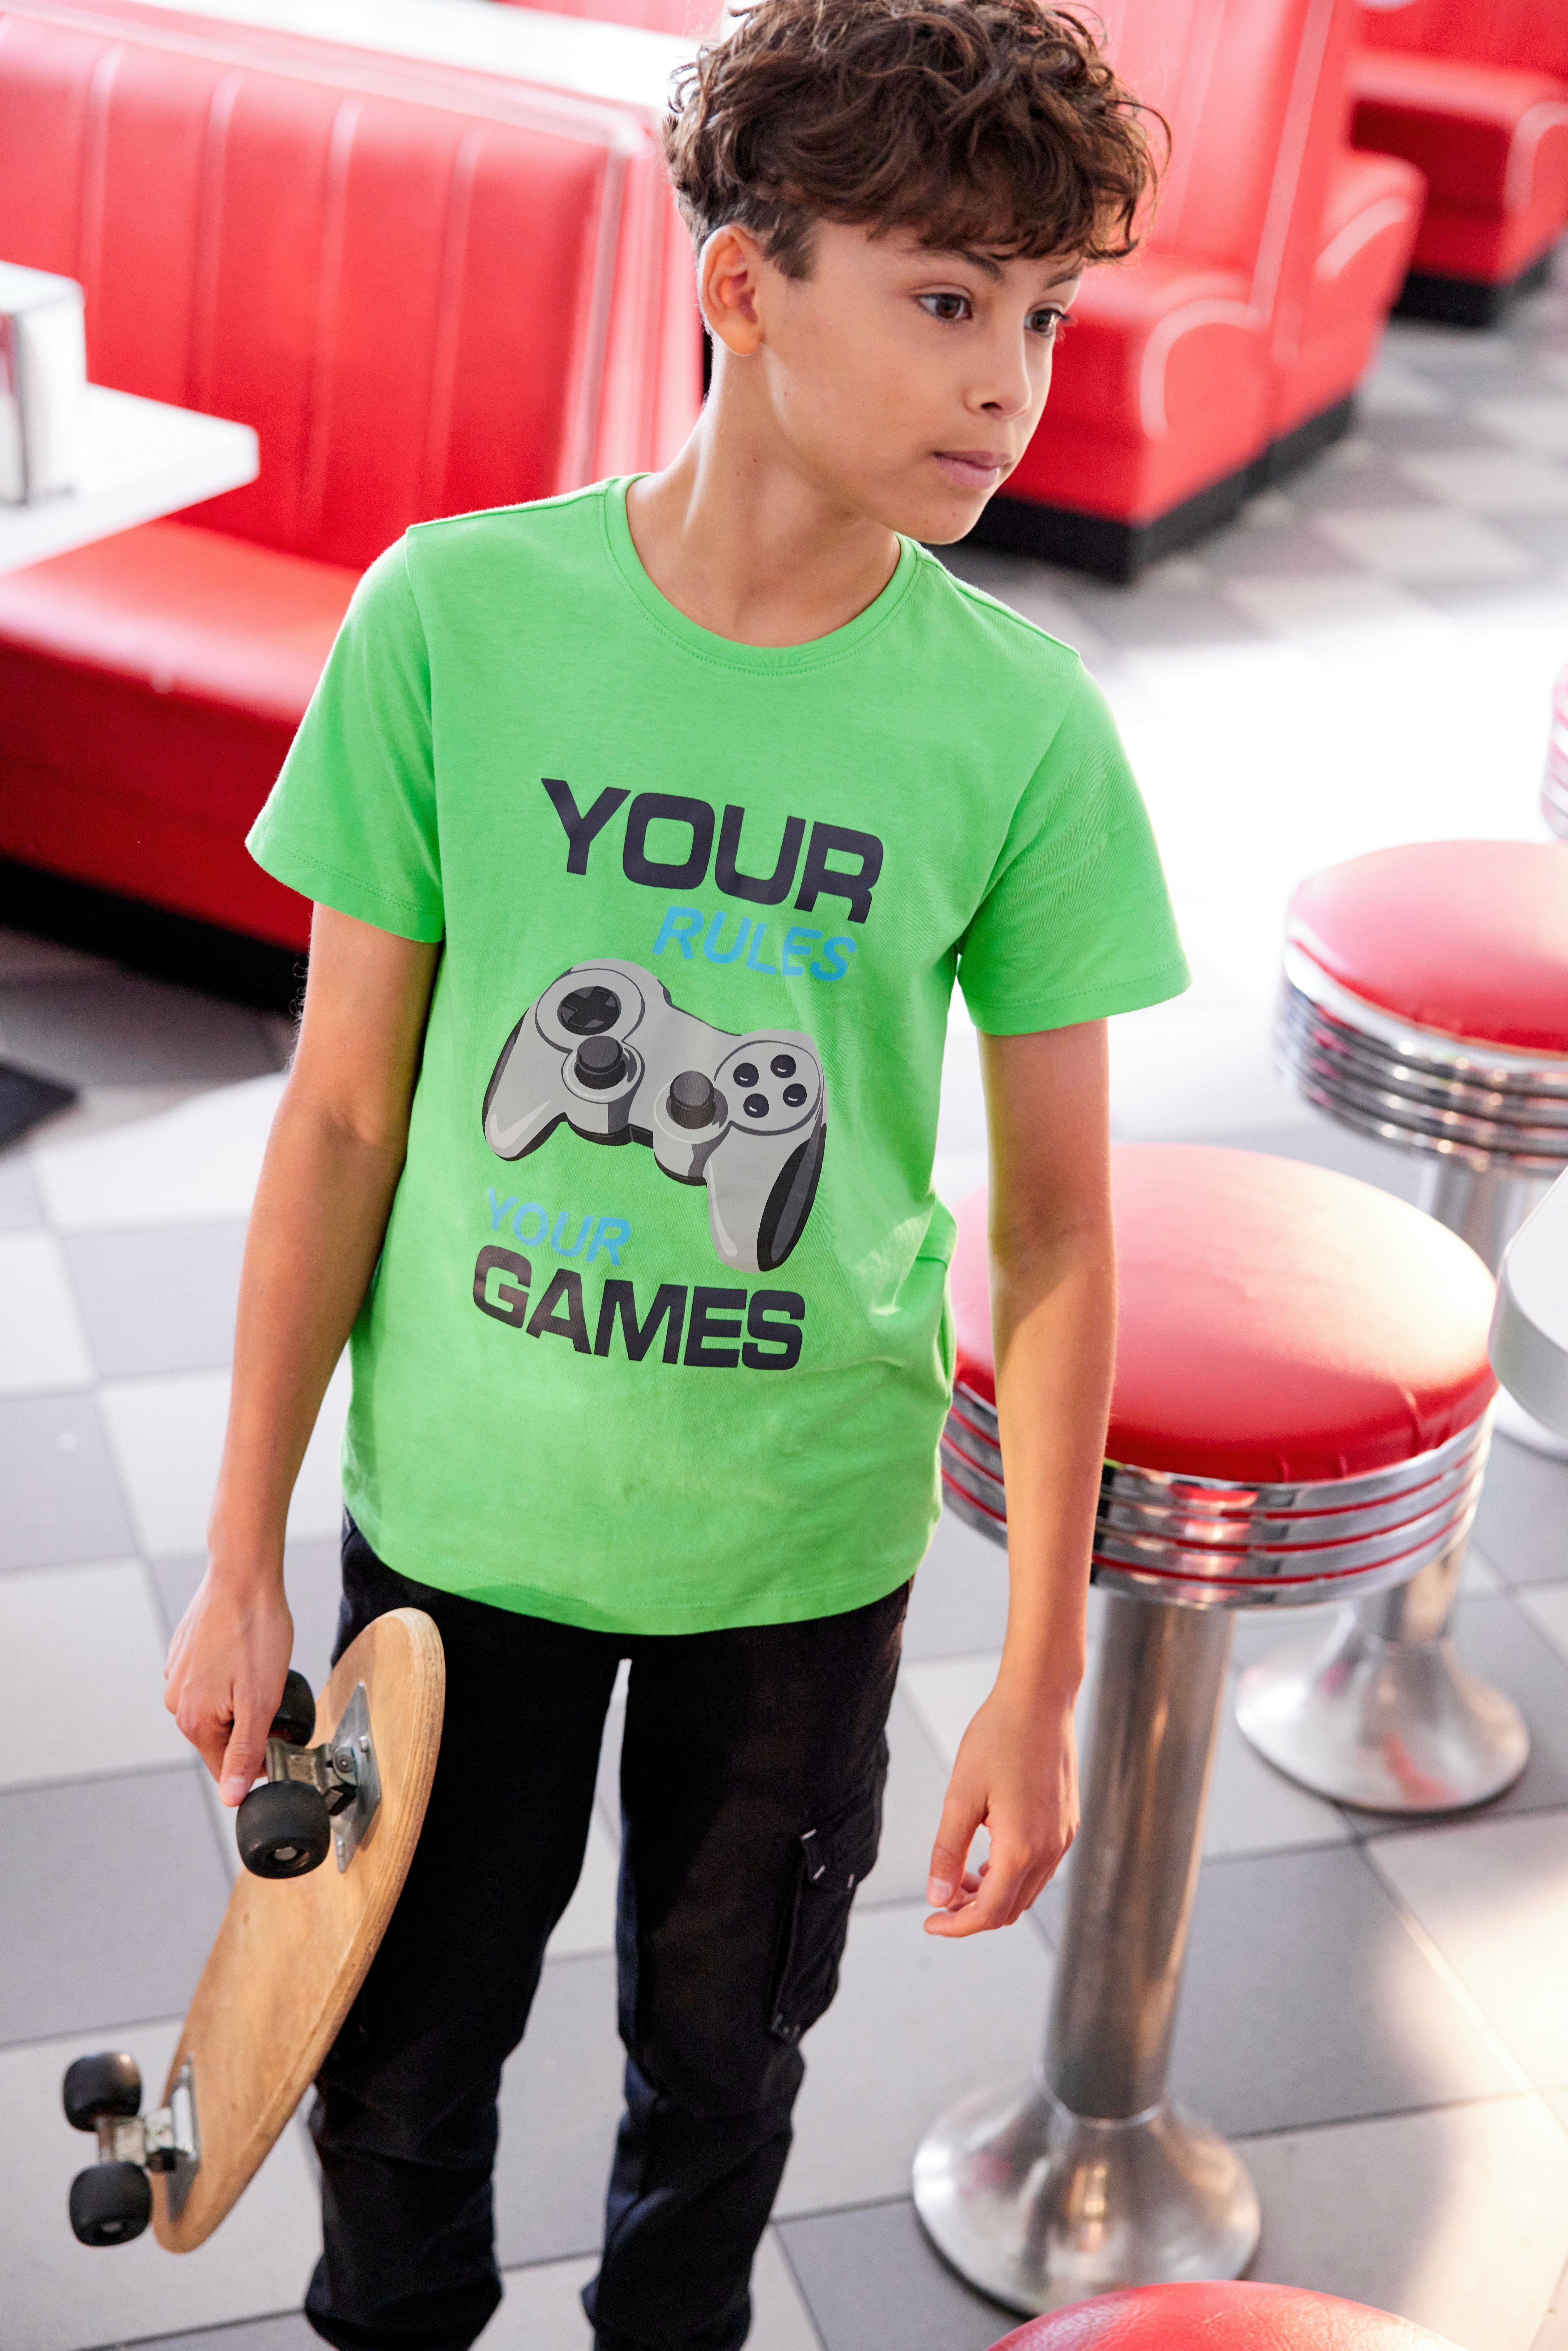 KIDSWORLD T-Shirt YOUR YOUR GAMES RULES